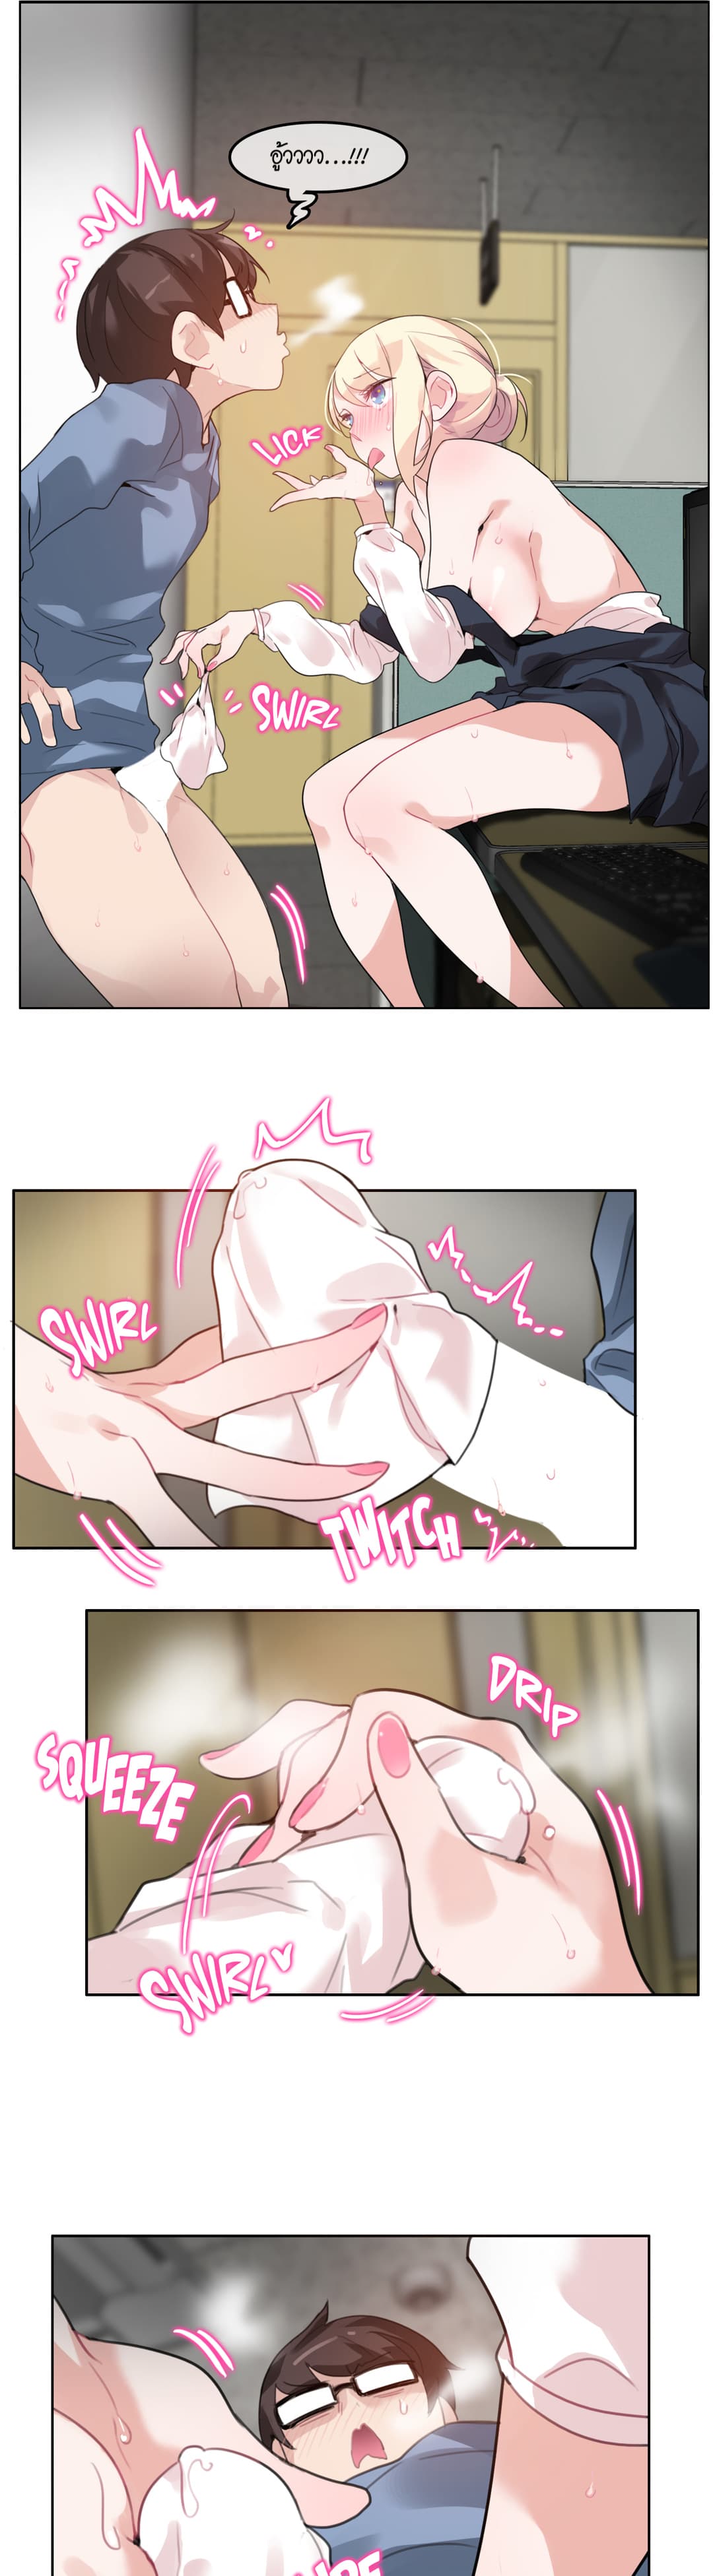 A Pervert’s Daily Life 25 (10)